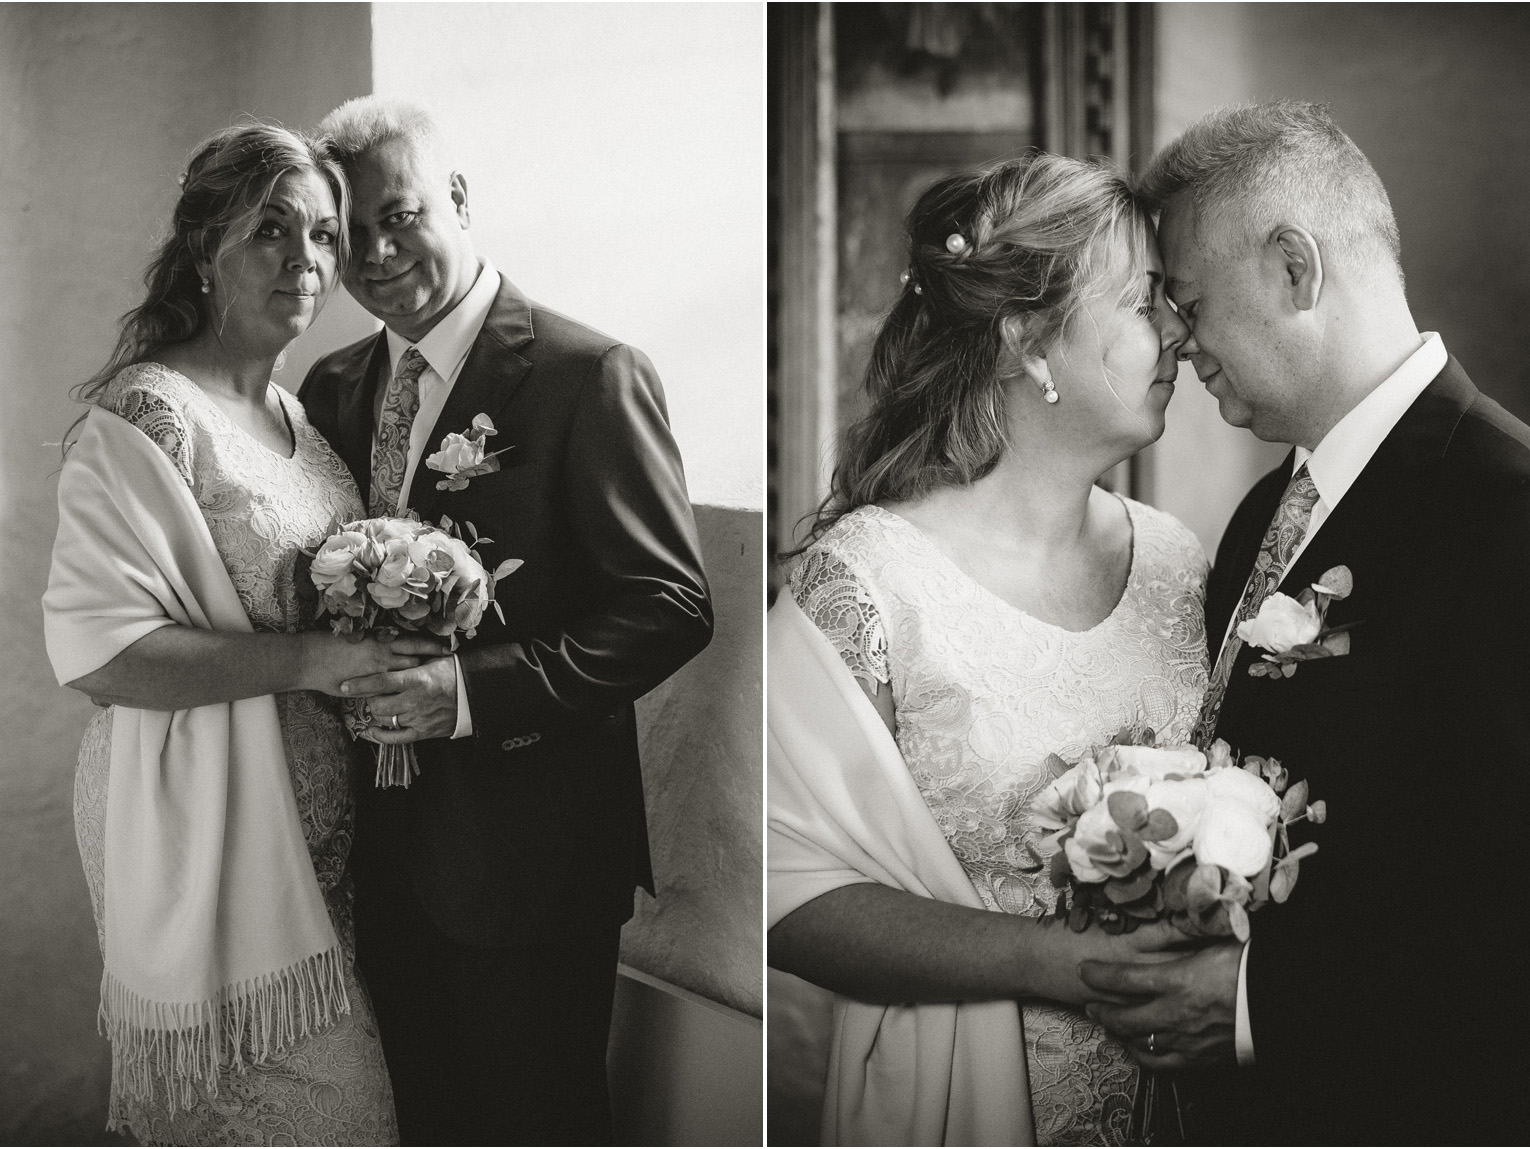 038-black-and-white-wedding-photography-in-sweden-by-wedding-photographer-johan-lindqvist